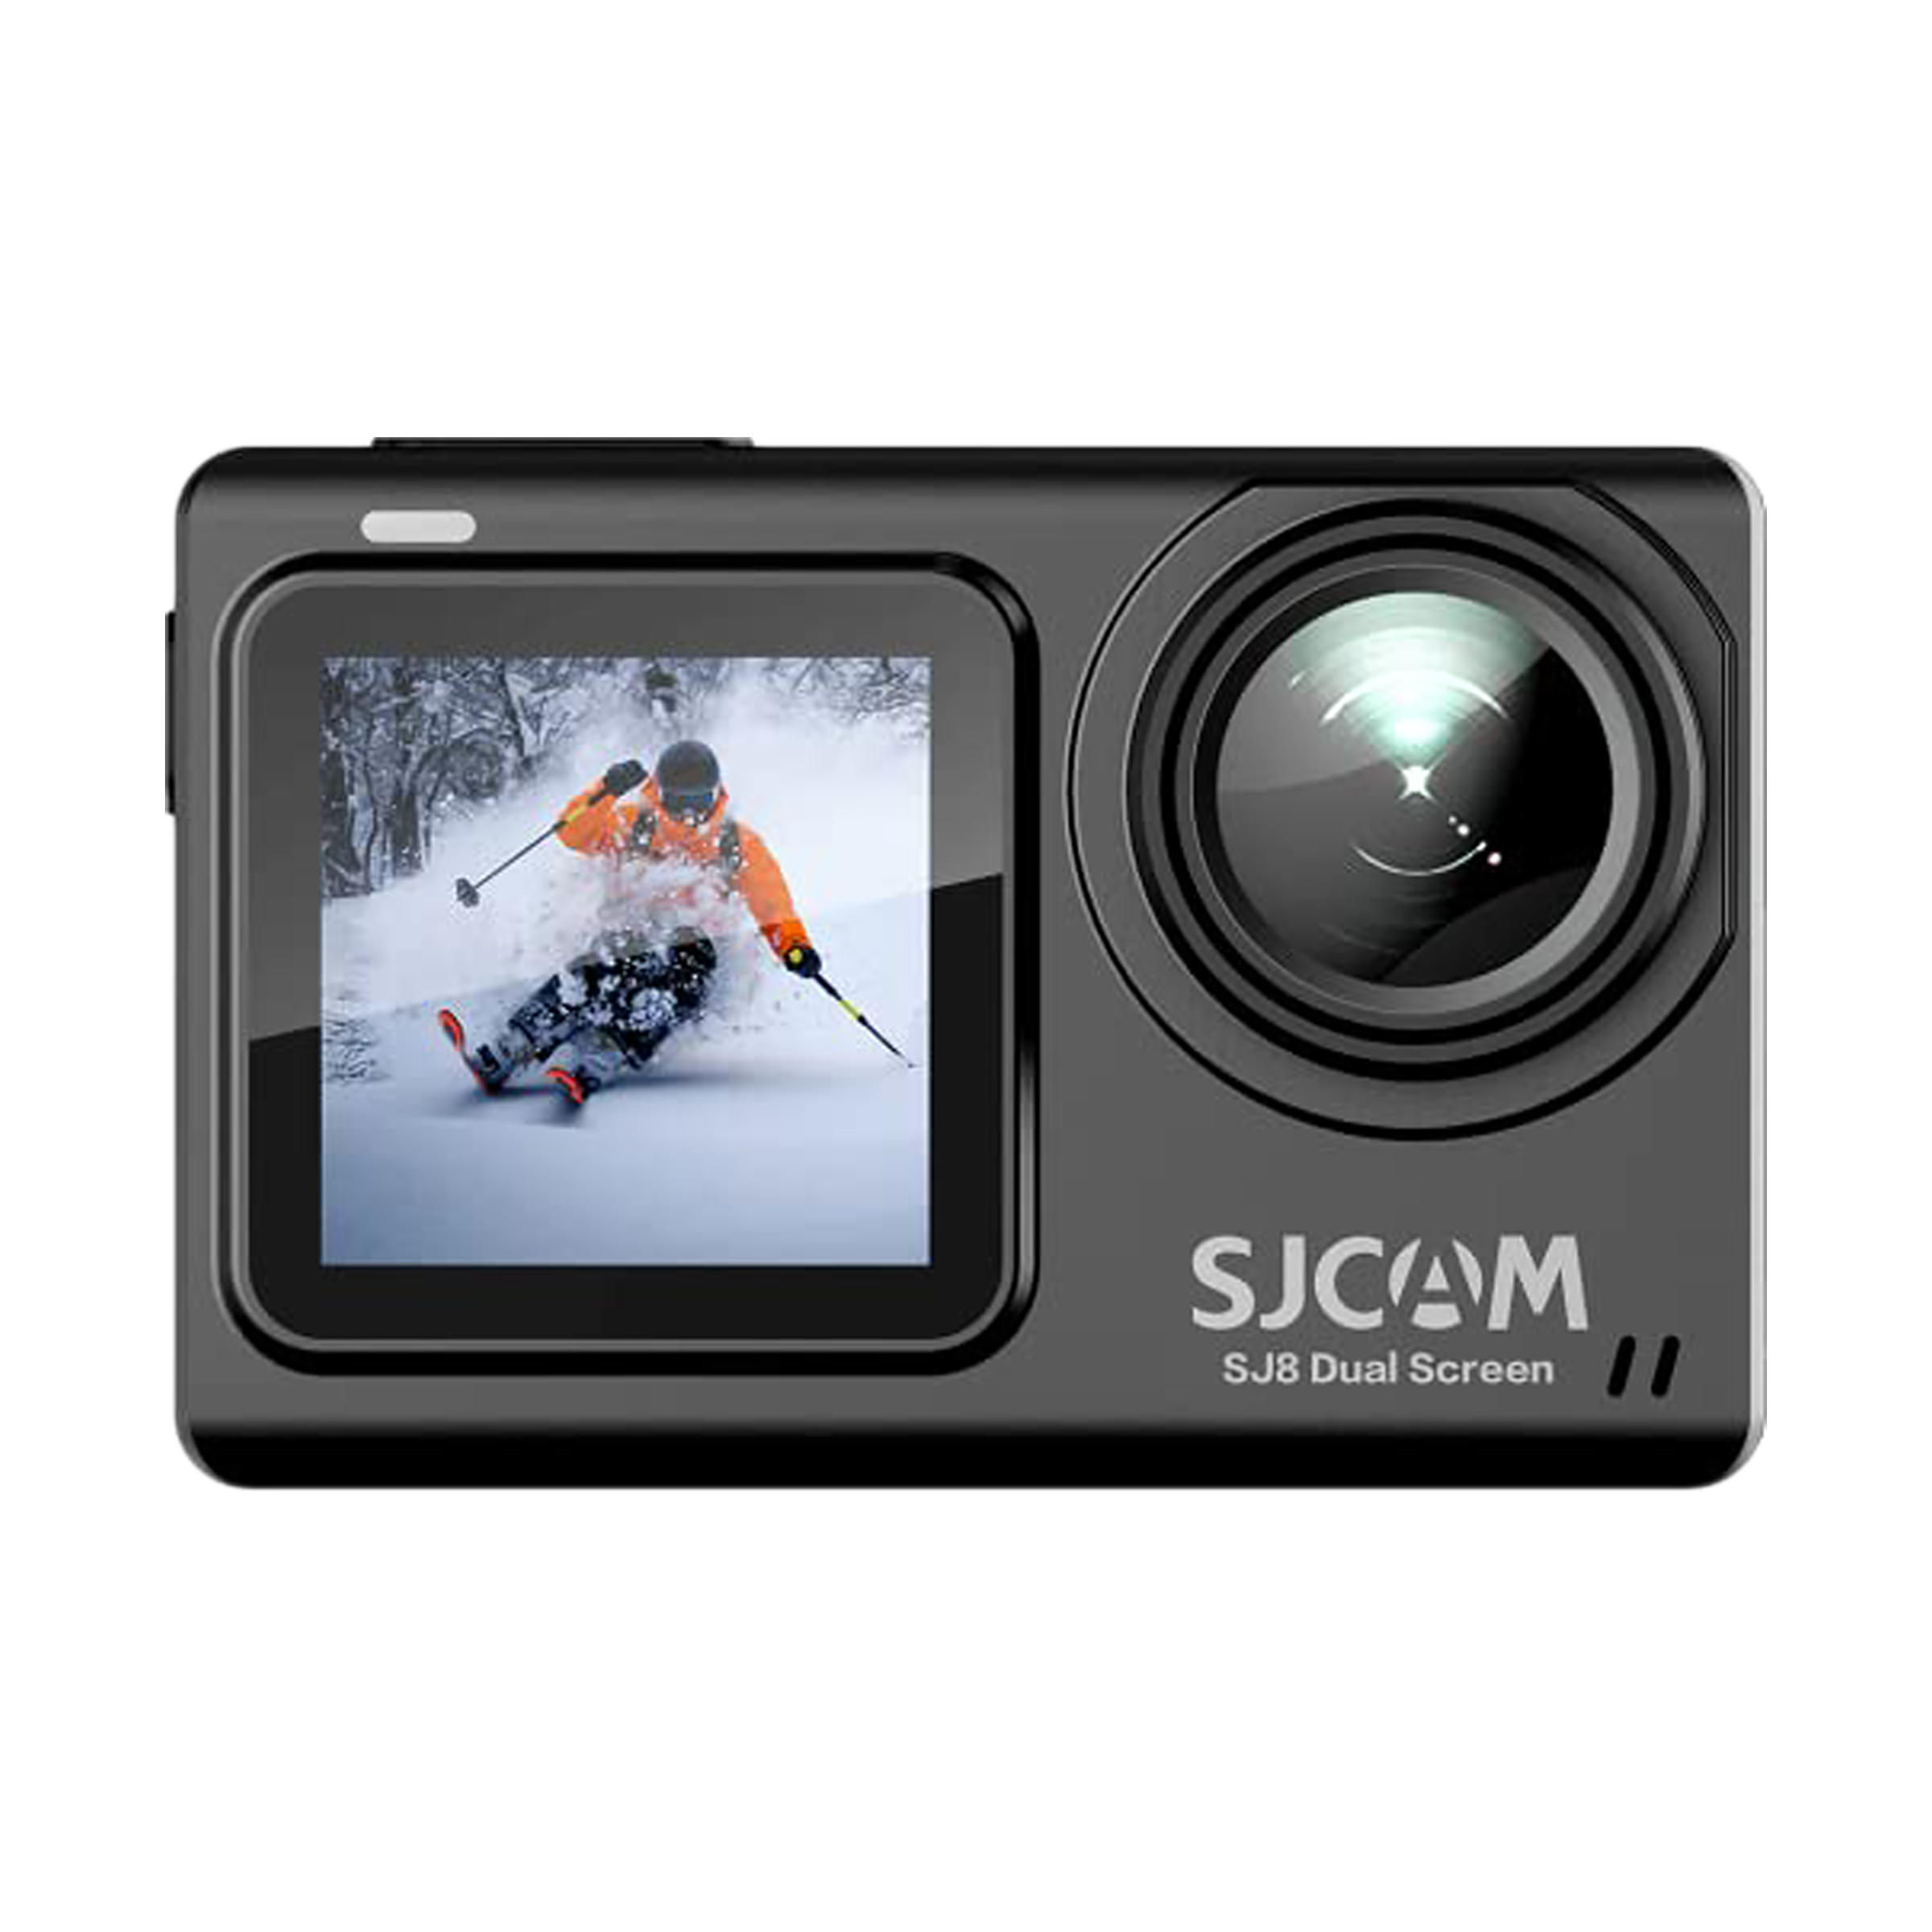 SJCAM SJ8 Dual Screen 4K and 20MP 30 FPS Waterproof Action Camera with 170 Degree Wide Angle (Black)